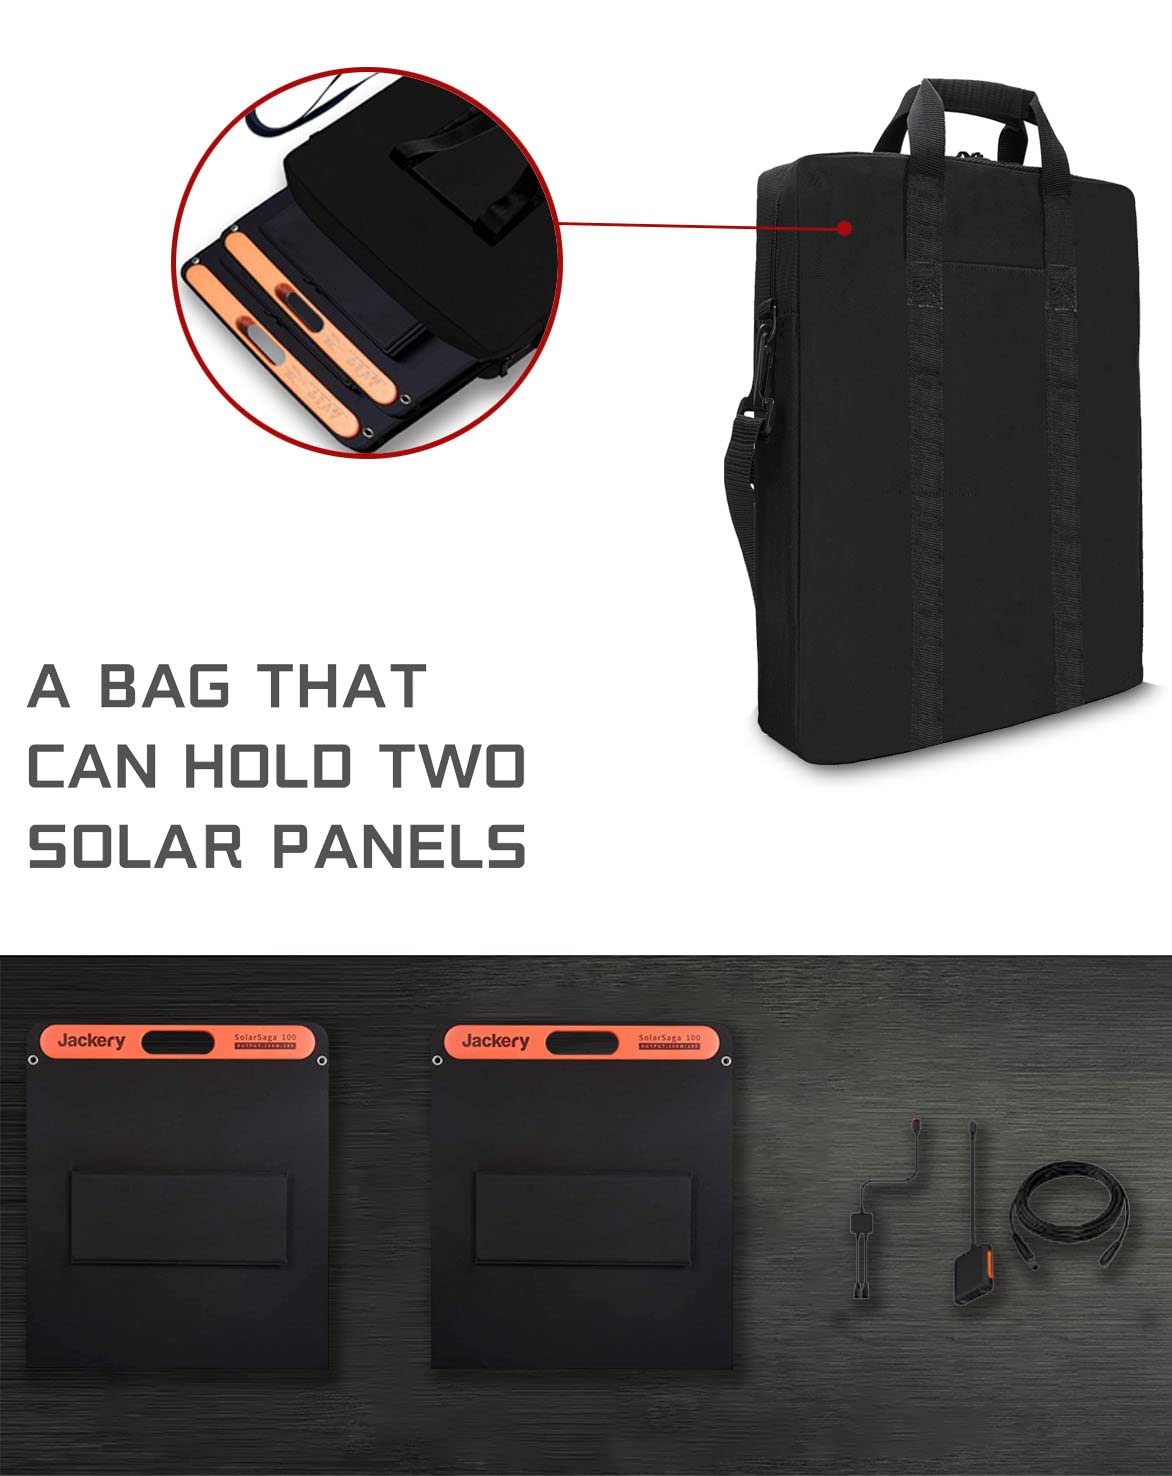 Global Storage Padded Utility Solar Panel Bag,for Jackery 100 watt Solar Panel,Double Layer Design, Can Hold 2 Battery Panels.